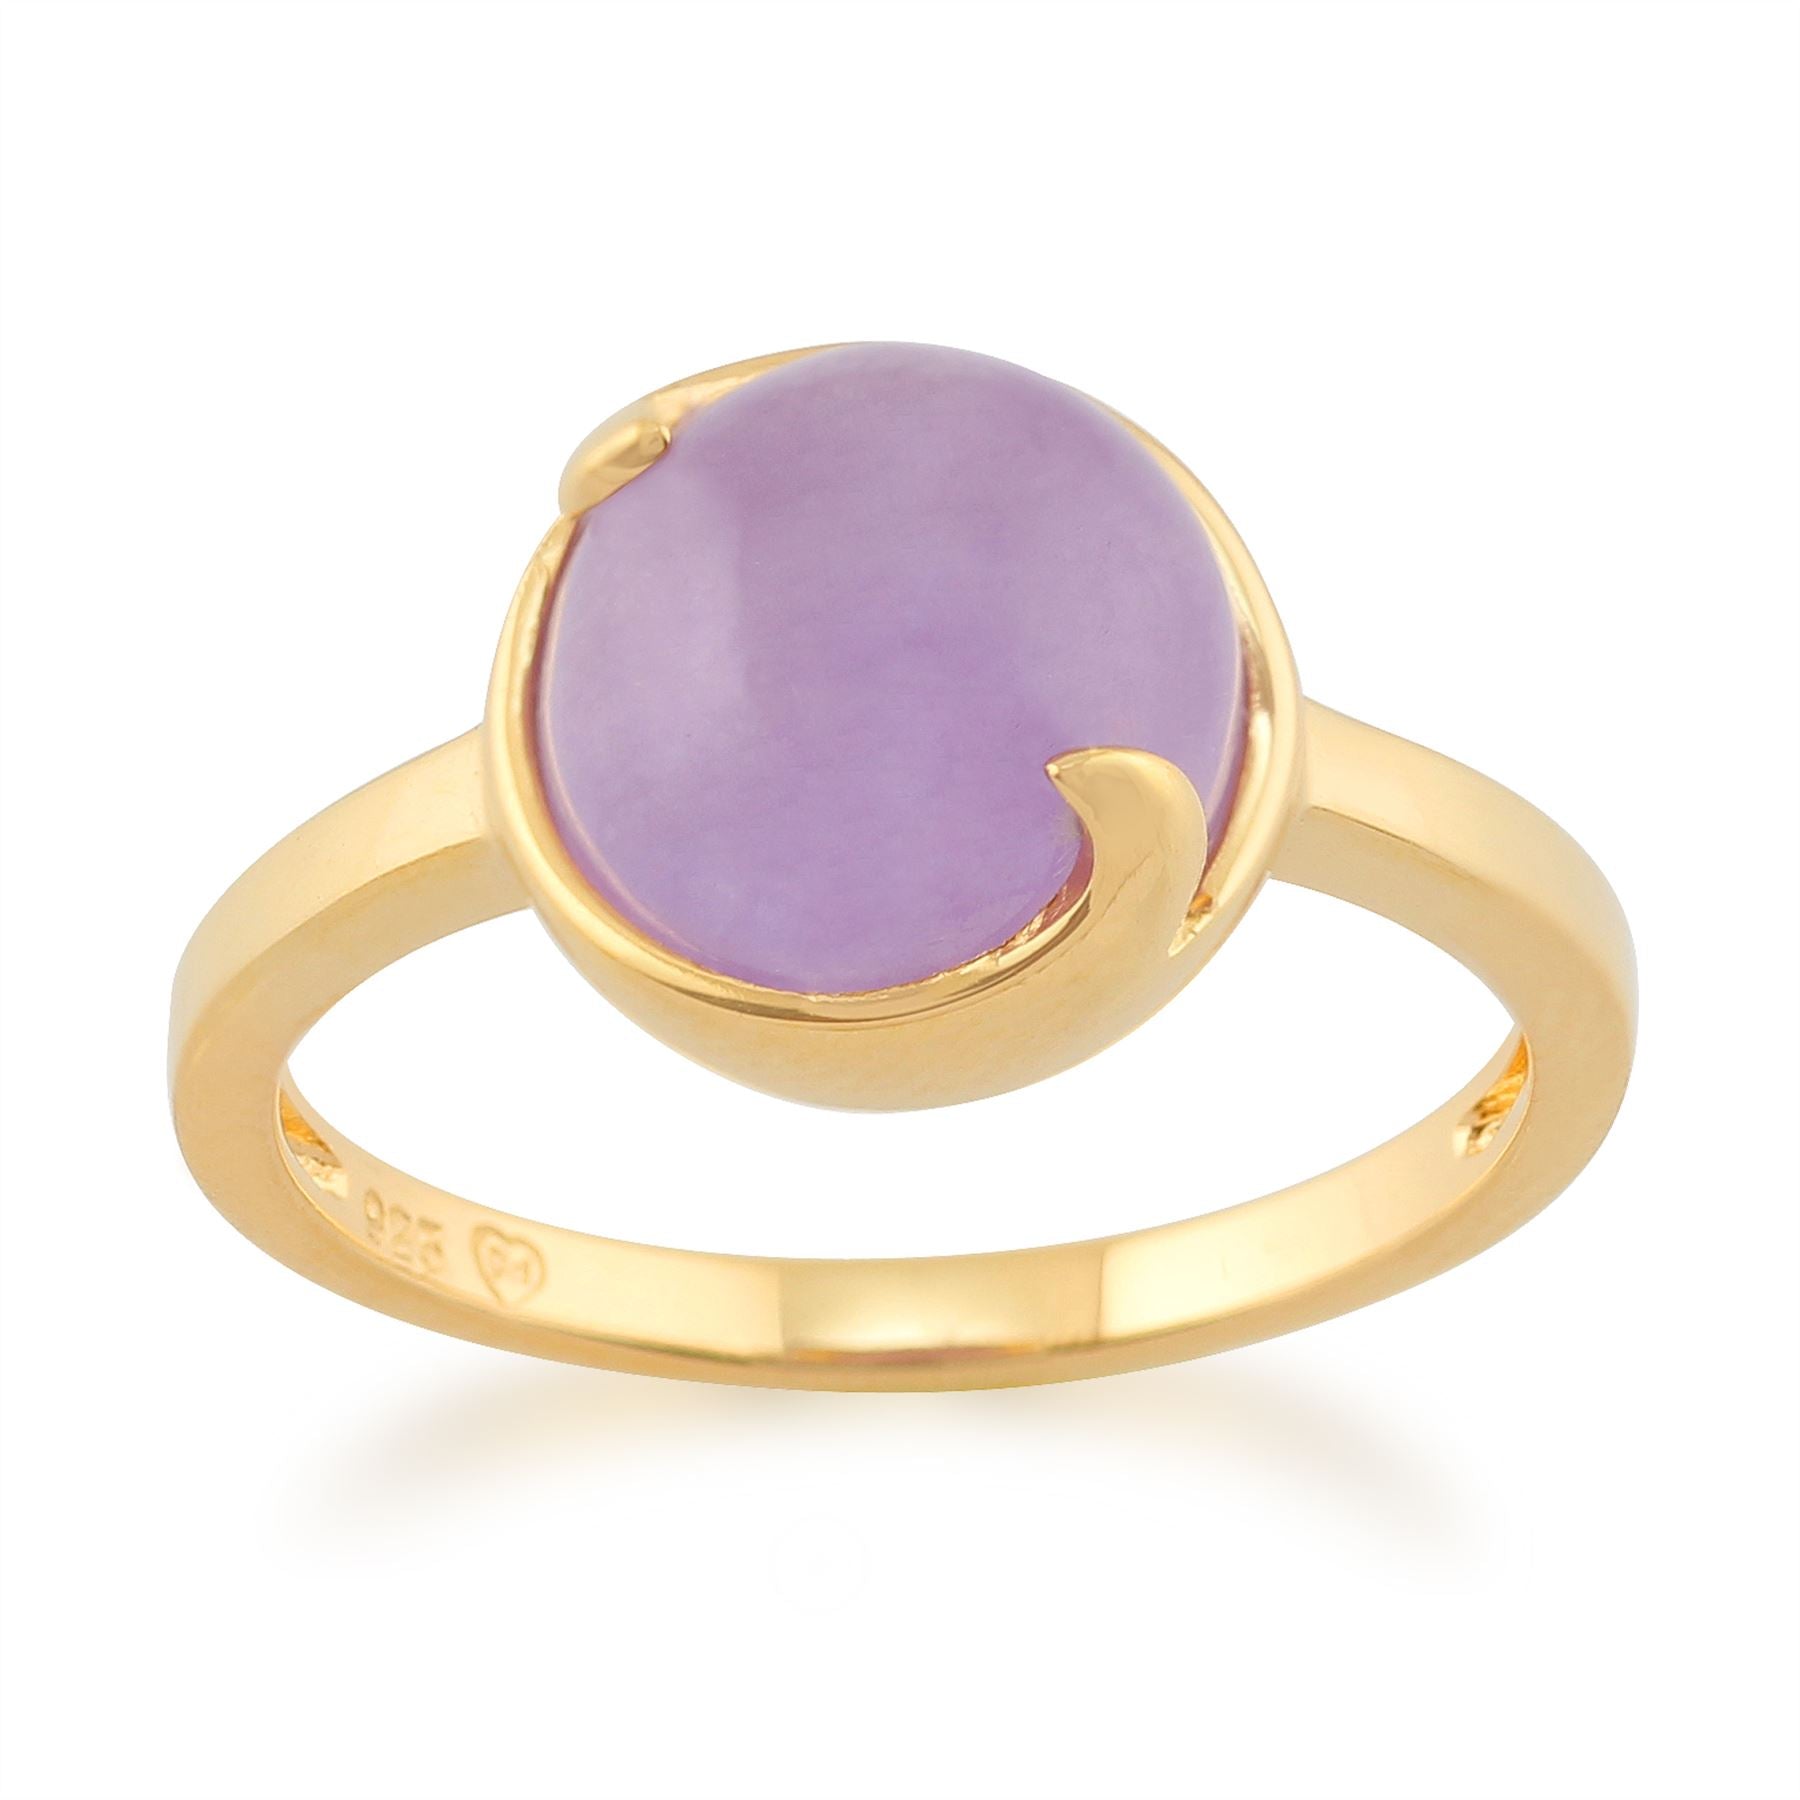 271R016603925 Lavender Jade 'Vita' Pastel Ring in 9ct Yellow Gold Plated Sterling Silver 1